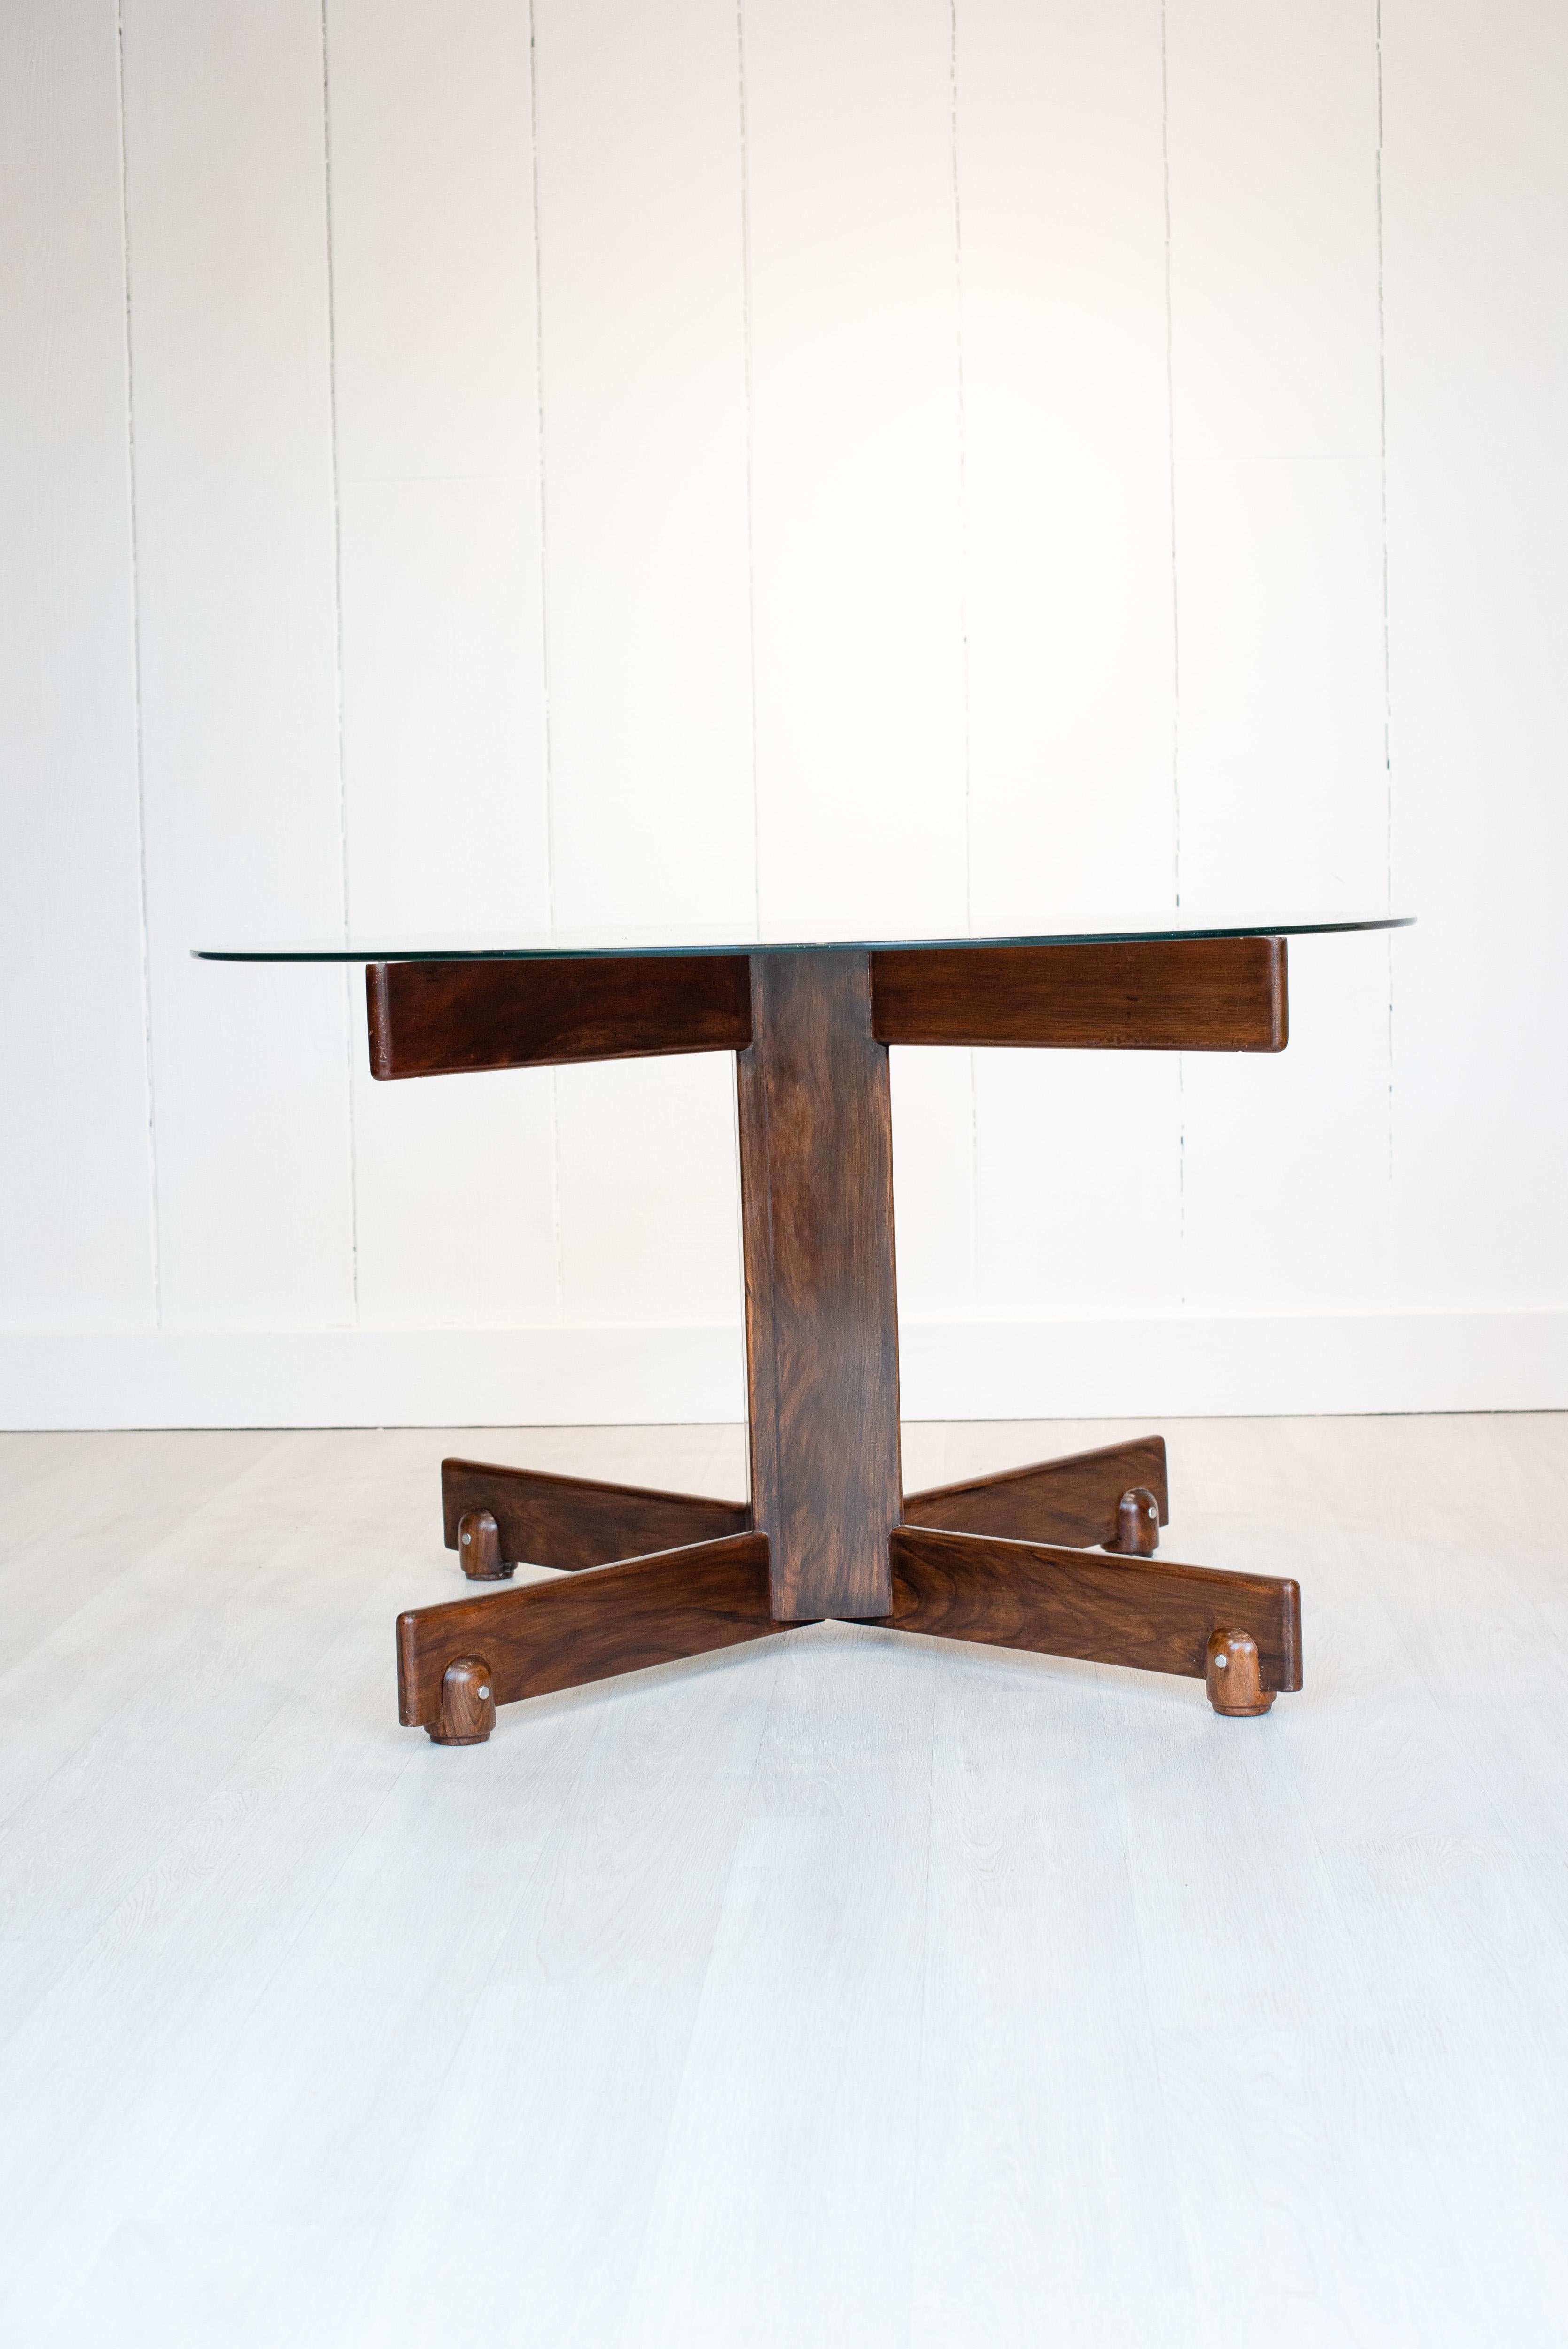 Designed in 1960 by Sergio Rodrigues, this model dining table 